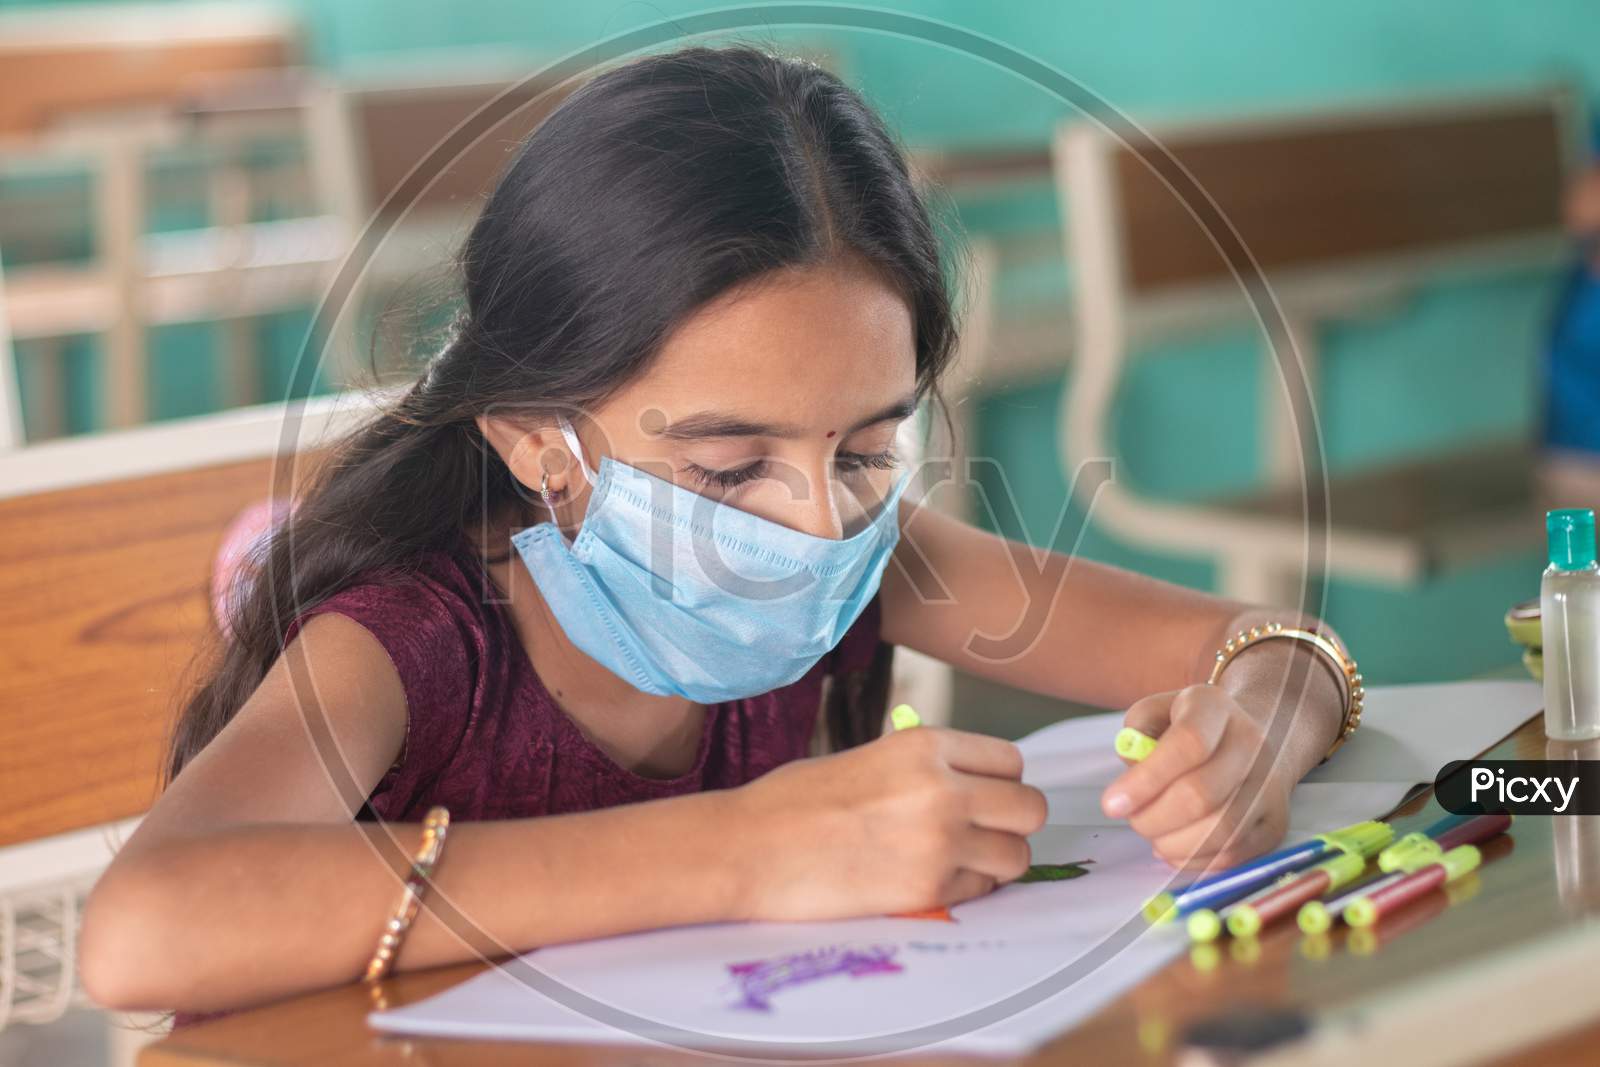 Young Girl Kid In Medical Mask Busy In Drawing Sketch At Classroom - Concept Of Safety Masures At School Due To Coronavirus Or Covid-19 Pandemic.